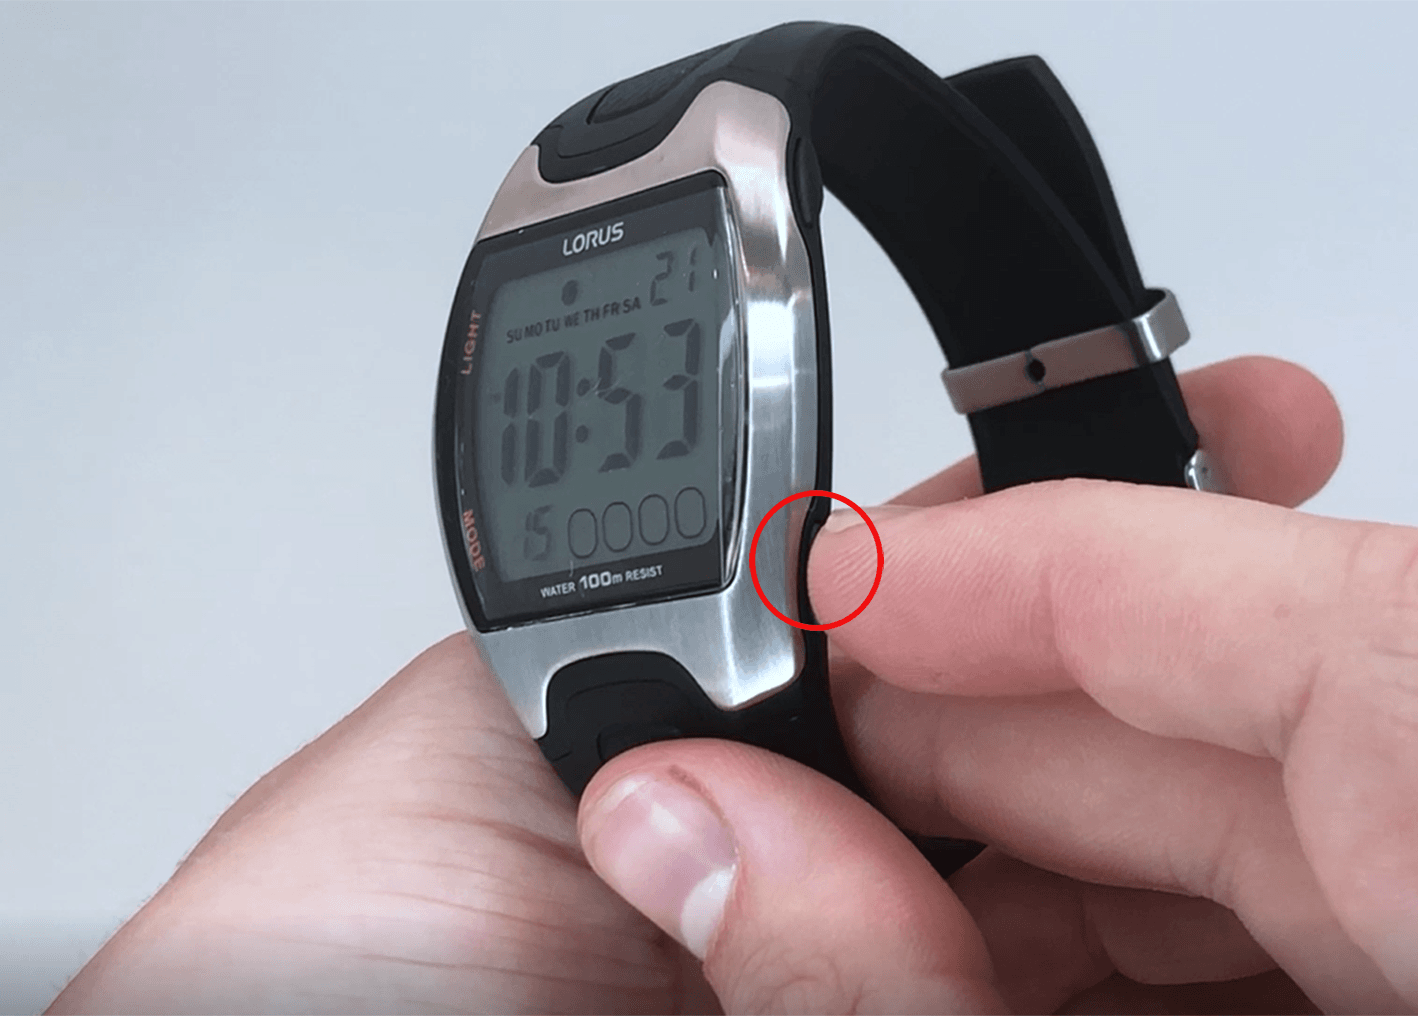 How To Change The Time On A Lorus Digital Watch. Set/Reset